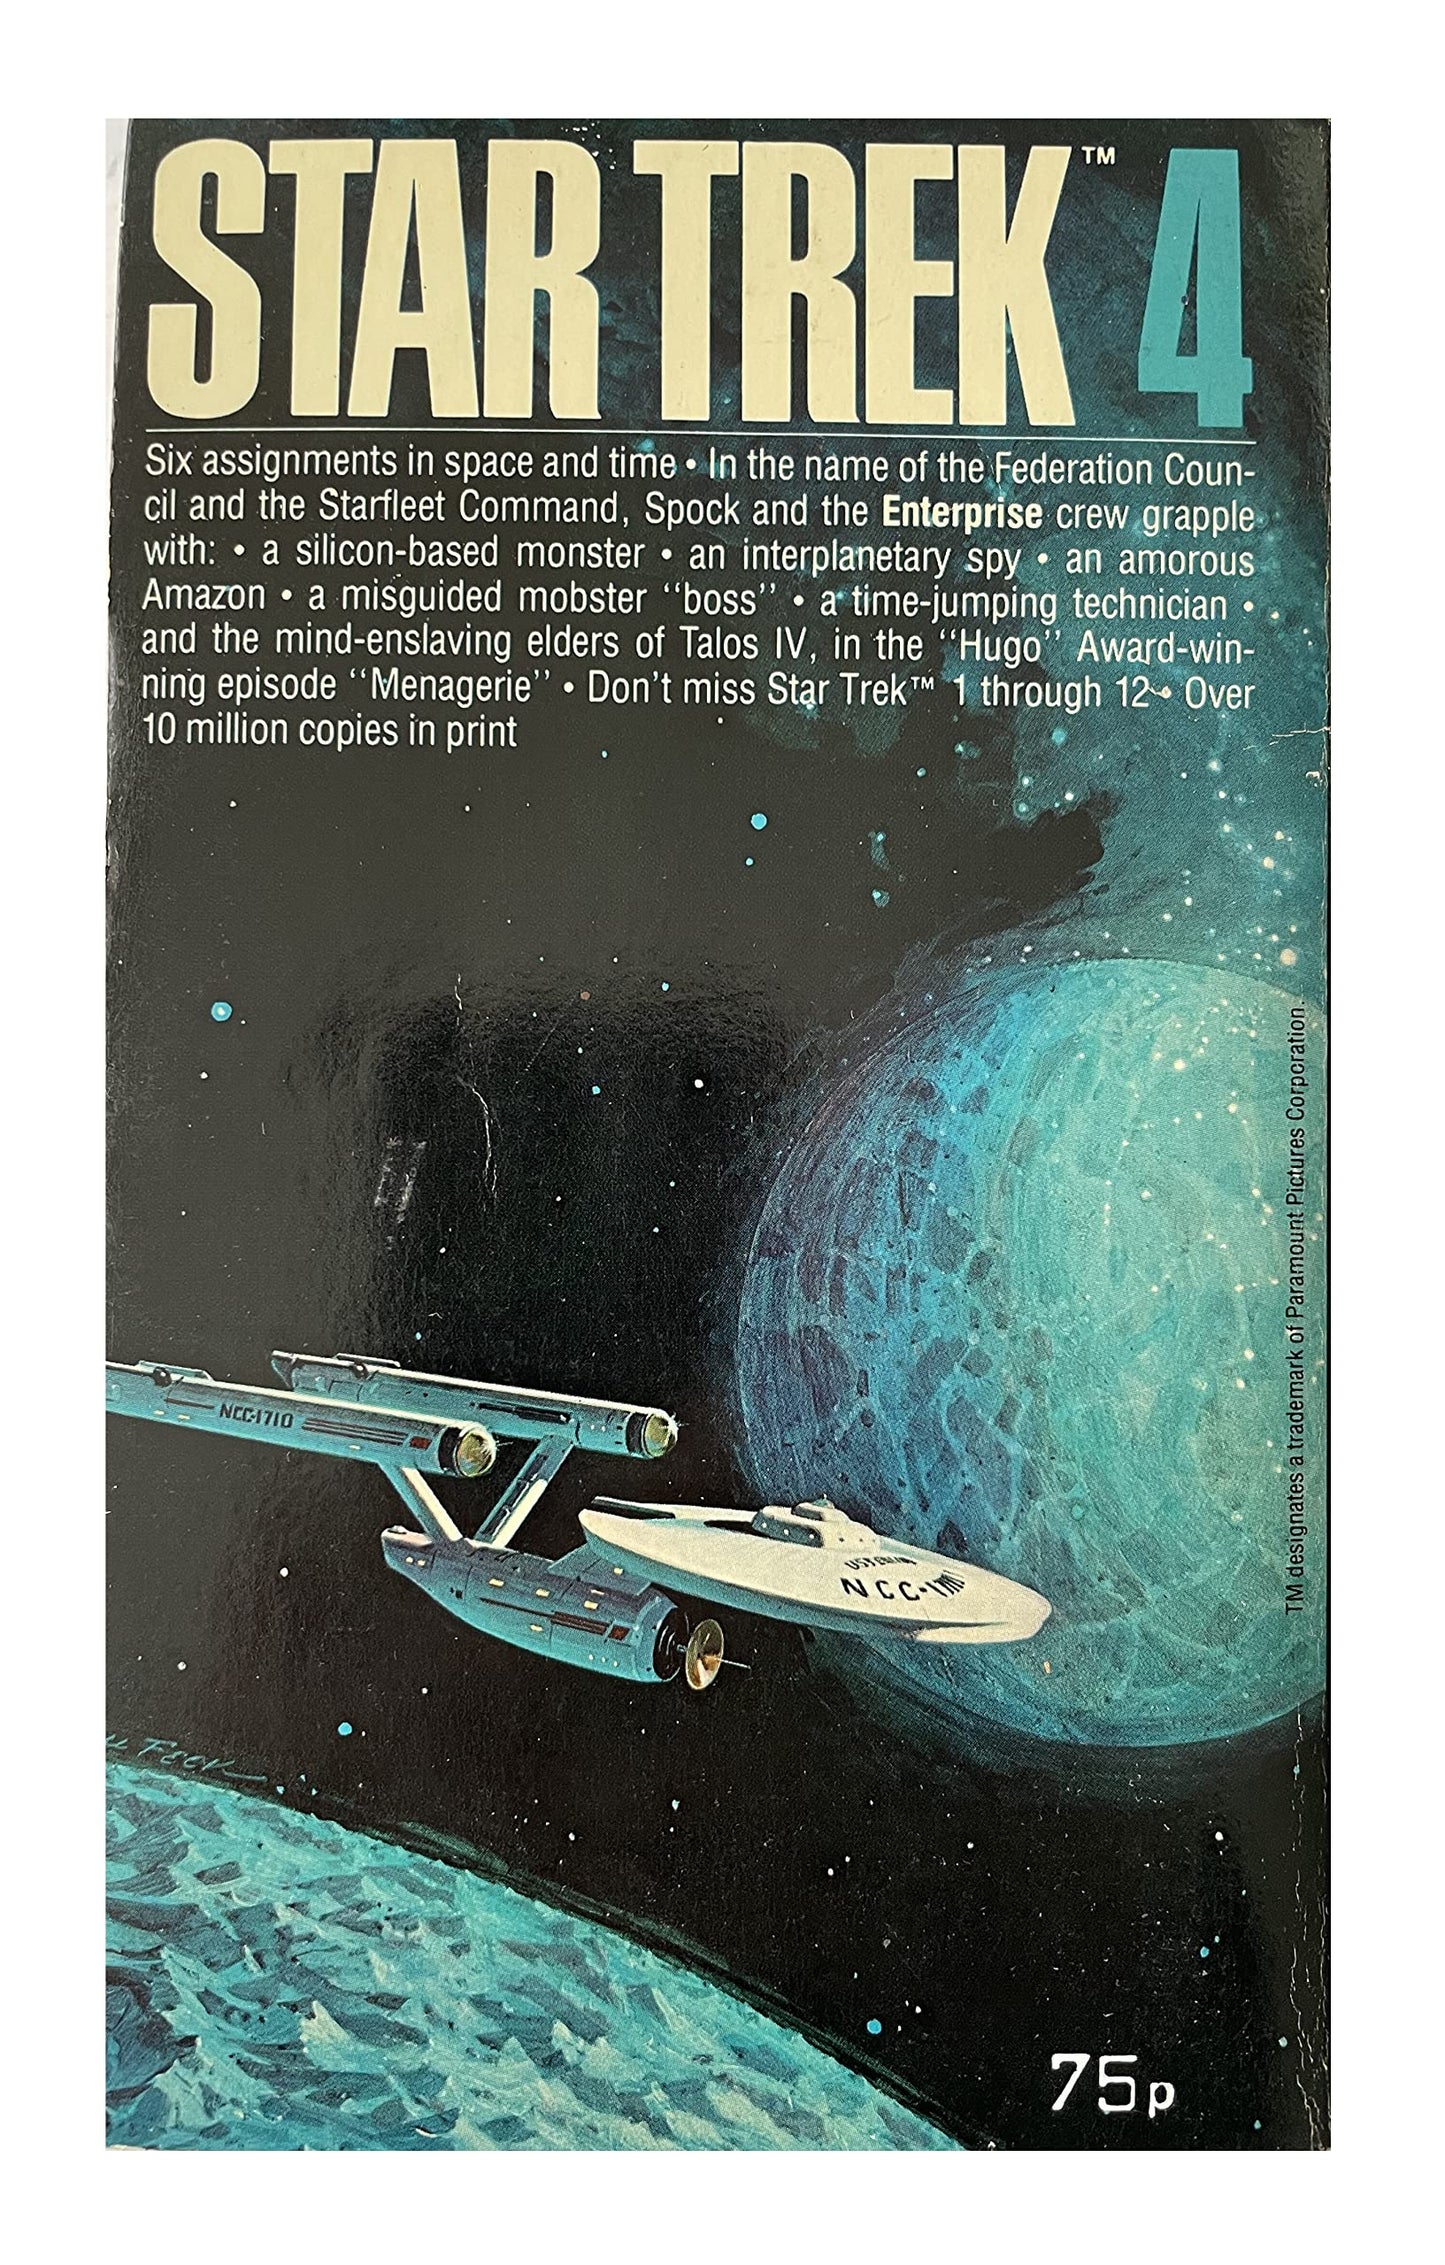 Vintage 1978 Star Trek 4 - Adapted From The Original Television Series - Paperback Book - By James Blish